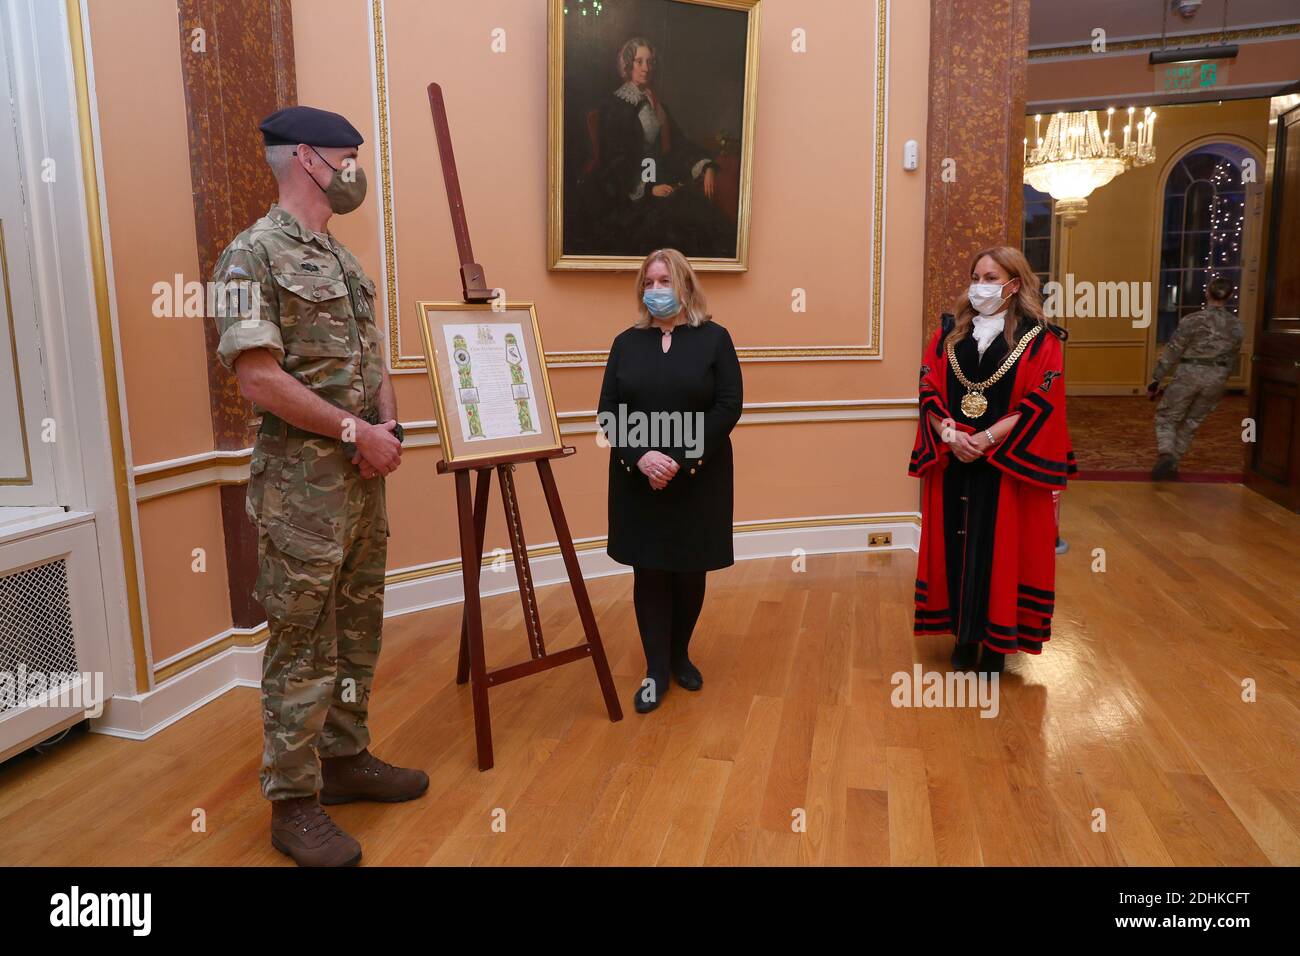 Lord Mayor of Liverpool, Anna Rothery and Deputy Mayor of Liverpool, Councillor Wendy Simon presents a scroll to Brigadier Joe Fossey, Commander of the 8th Engineer Brigade, in a ceremony at Liverpool Town Hall. The scroll proposes the inclusion in the Freedom Roll of Associations for the British Army regiments that supported the Covid testing pilot in Liverpool. The decision will be ratified at a council meeting in January and special commemorative coins will be issued to each of the troops involved in the operation as a civic gift from the city. Stock Photo